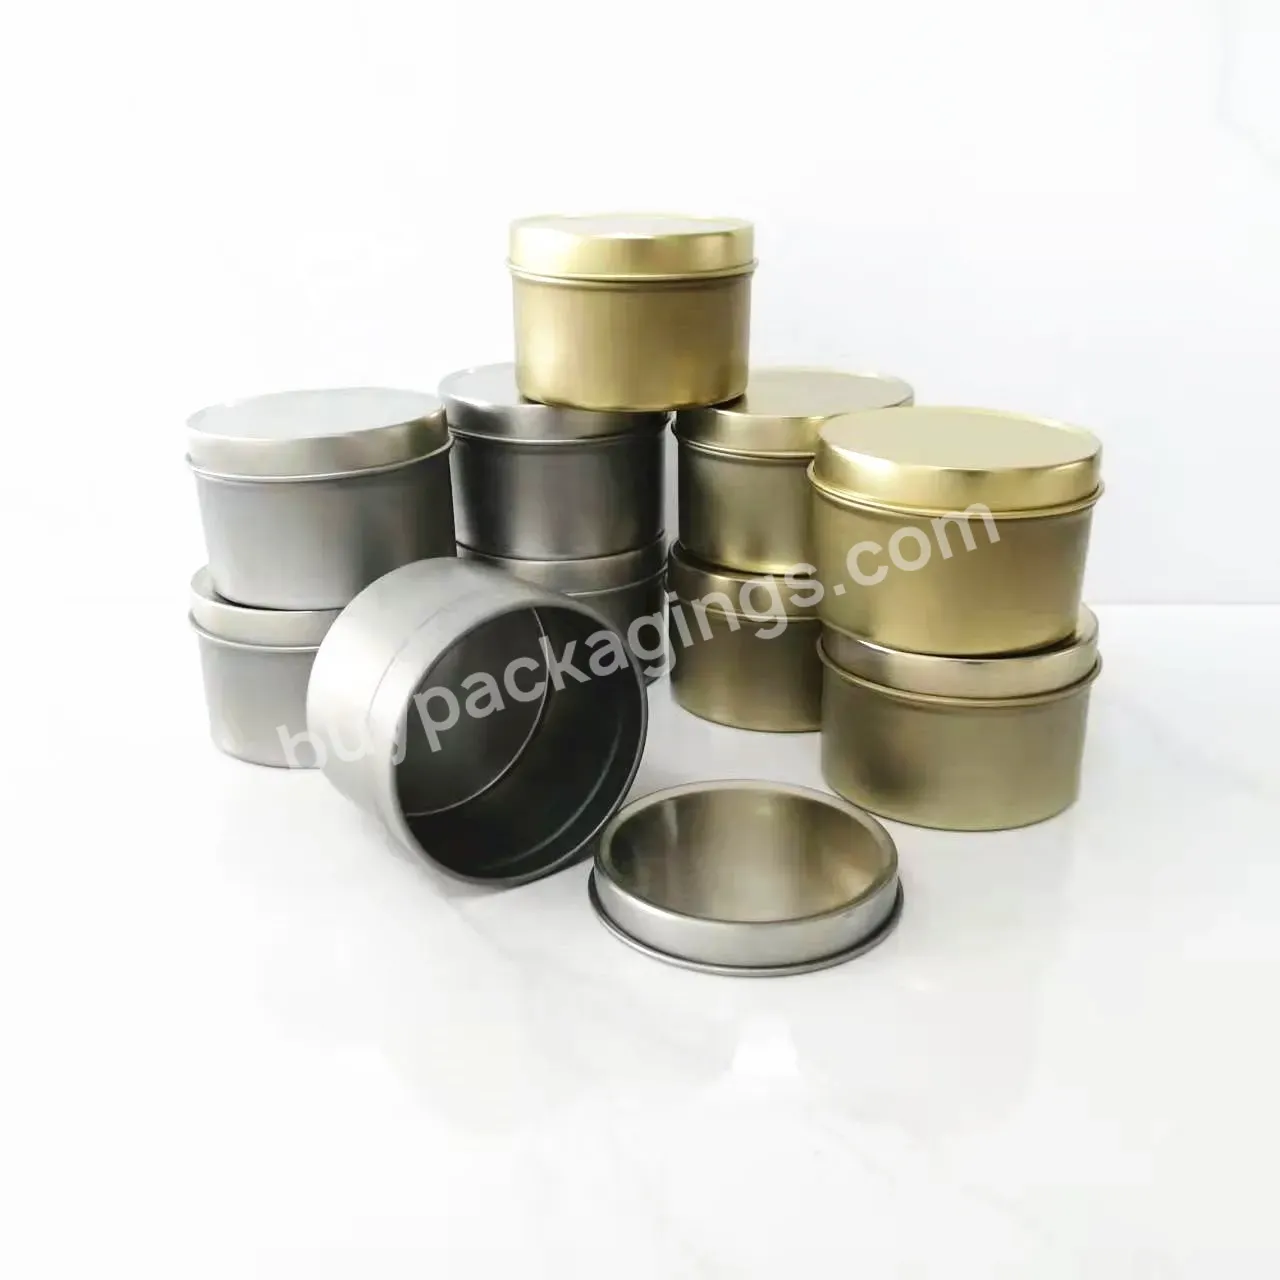 Factory Large Stock 2.5oz 3oz Candle Tins With Lids Scented Soy Wax Candle Tin For Candle Making Gift Box 60x40mm - Buy Small Tin Can For Candles 70g 75g 80g,Empty Tin Candle Containers With Lids 2oz 2.5oz 3oz Other Perfume Box,2.5 Oz 3 Oz Empty Cand